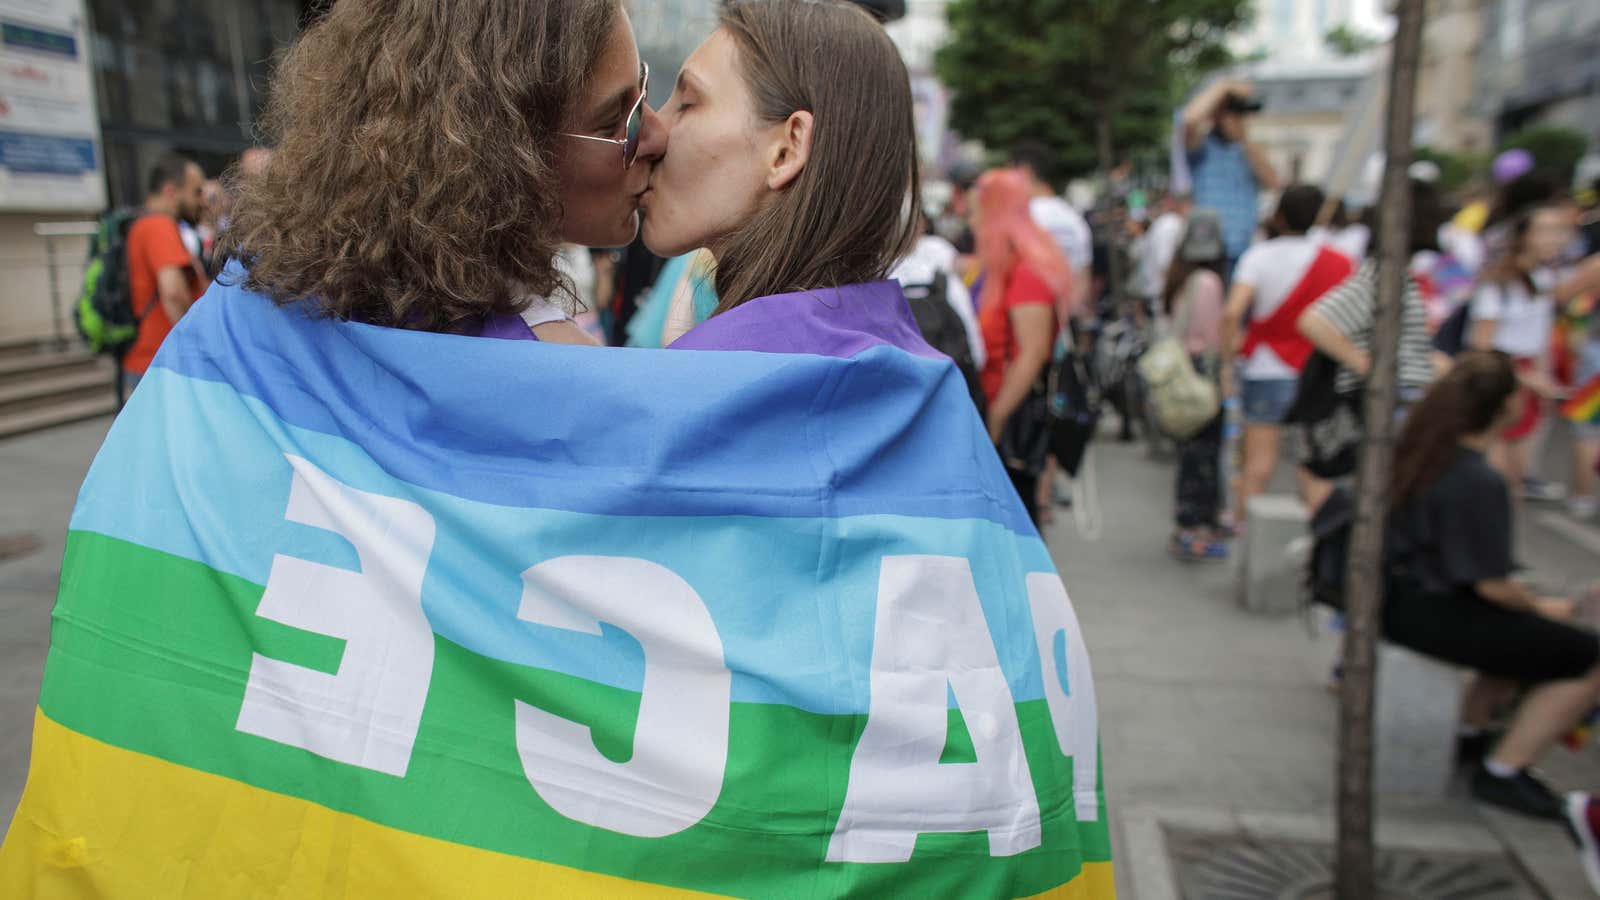 A couple kisses at a Pride march in Romania, where gay marriage is illegal.